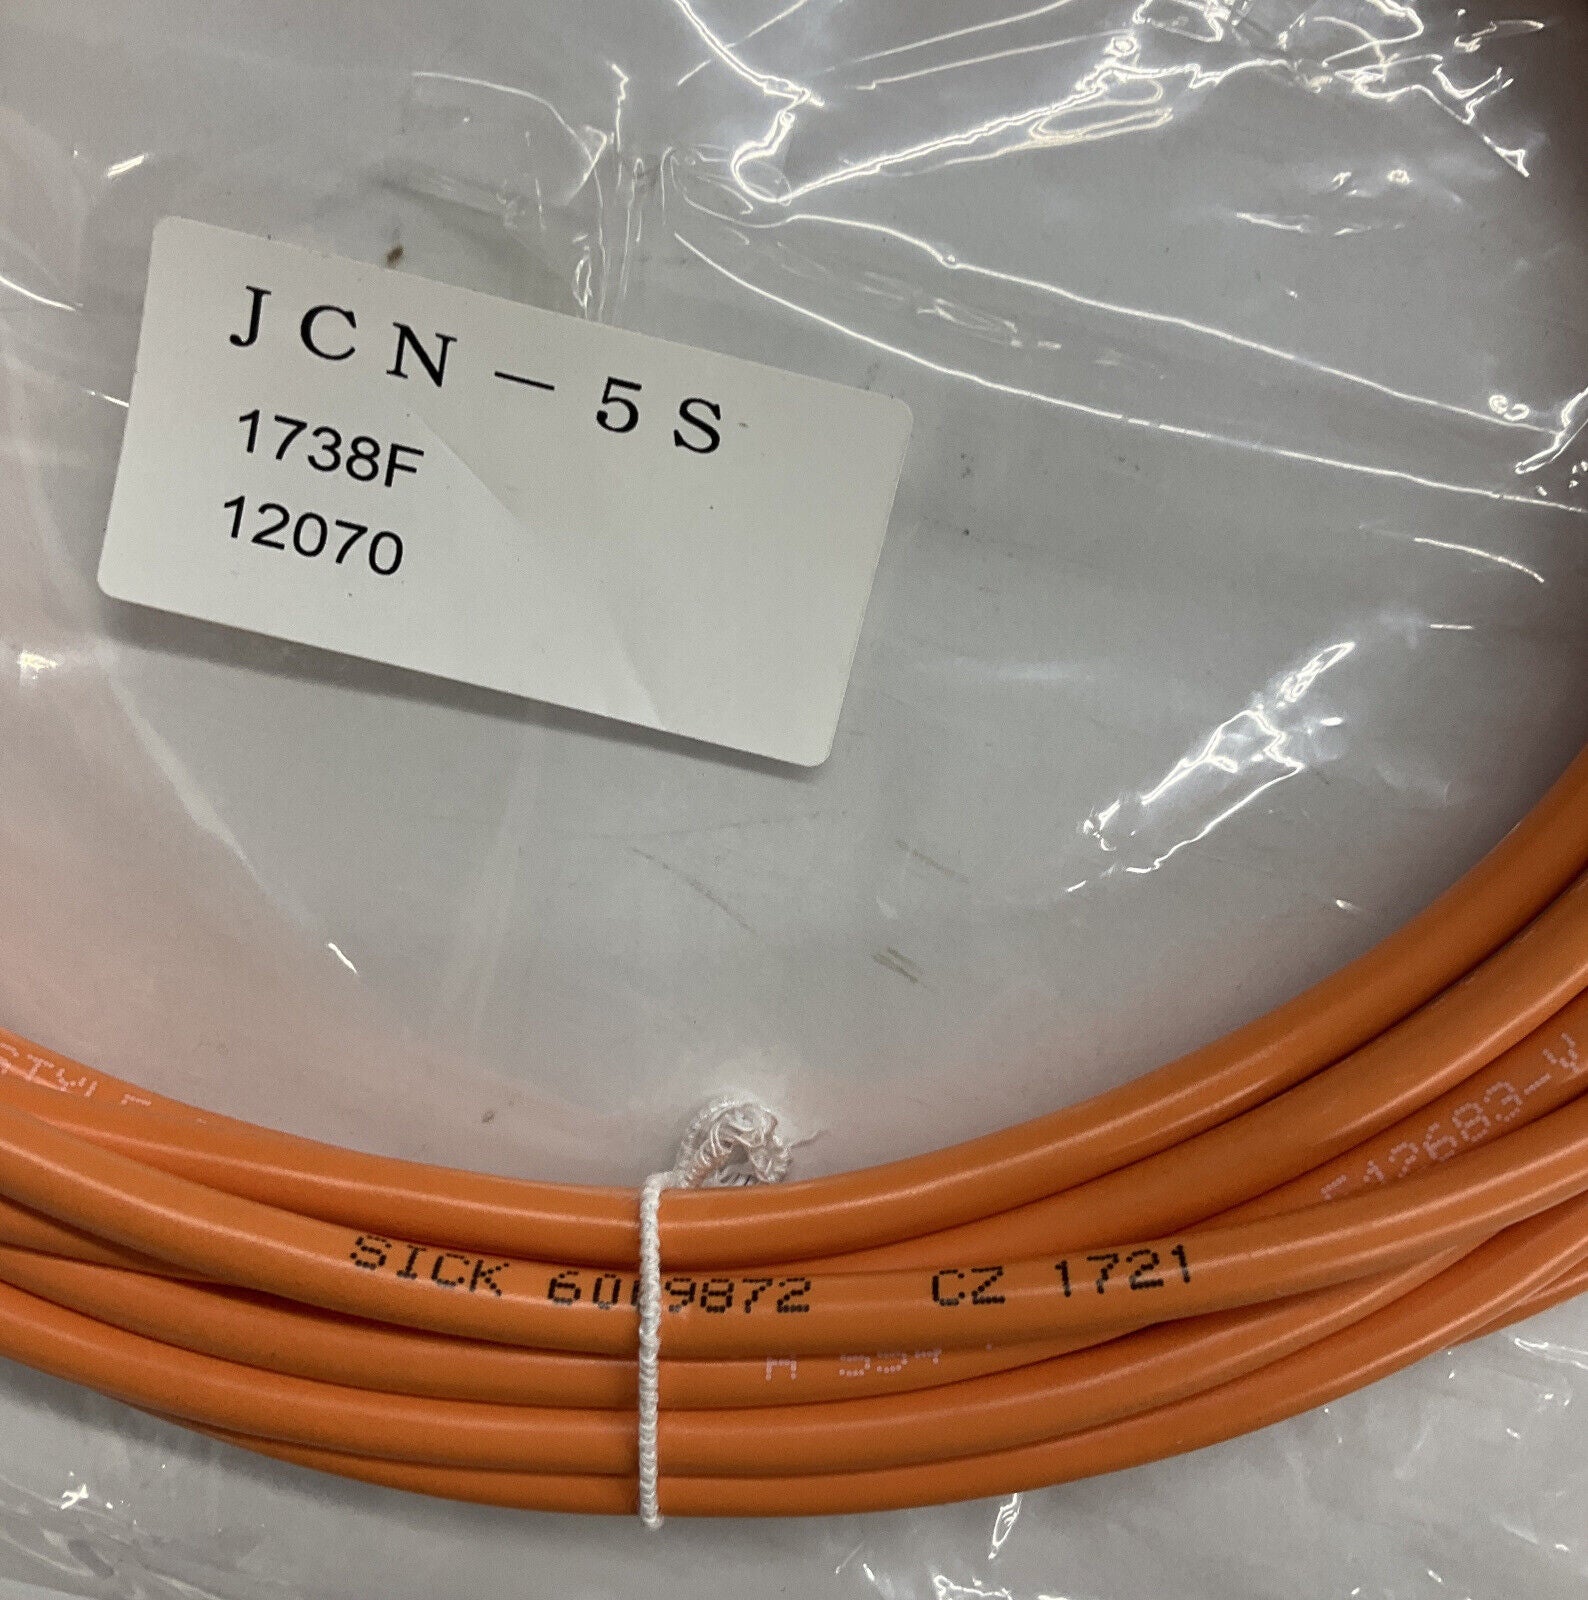 Sick JCN-5S 4-Pin Cable Cordset, 5 Meters M8 Female Straight Pigtail (CBL145) - 0